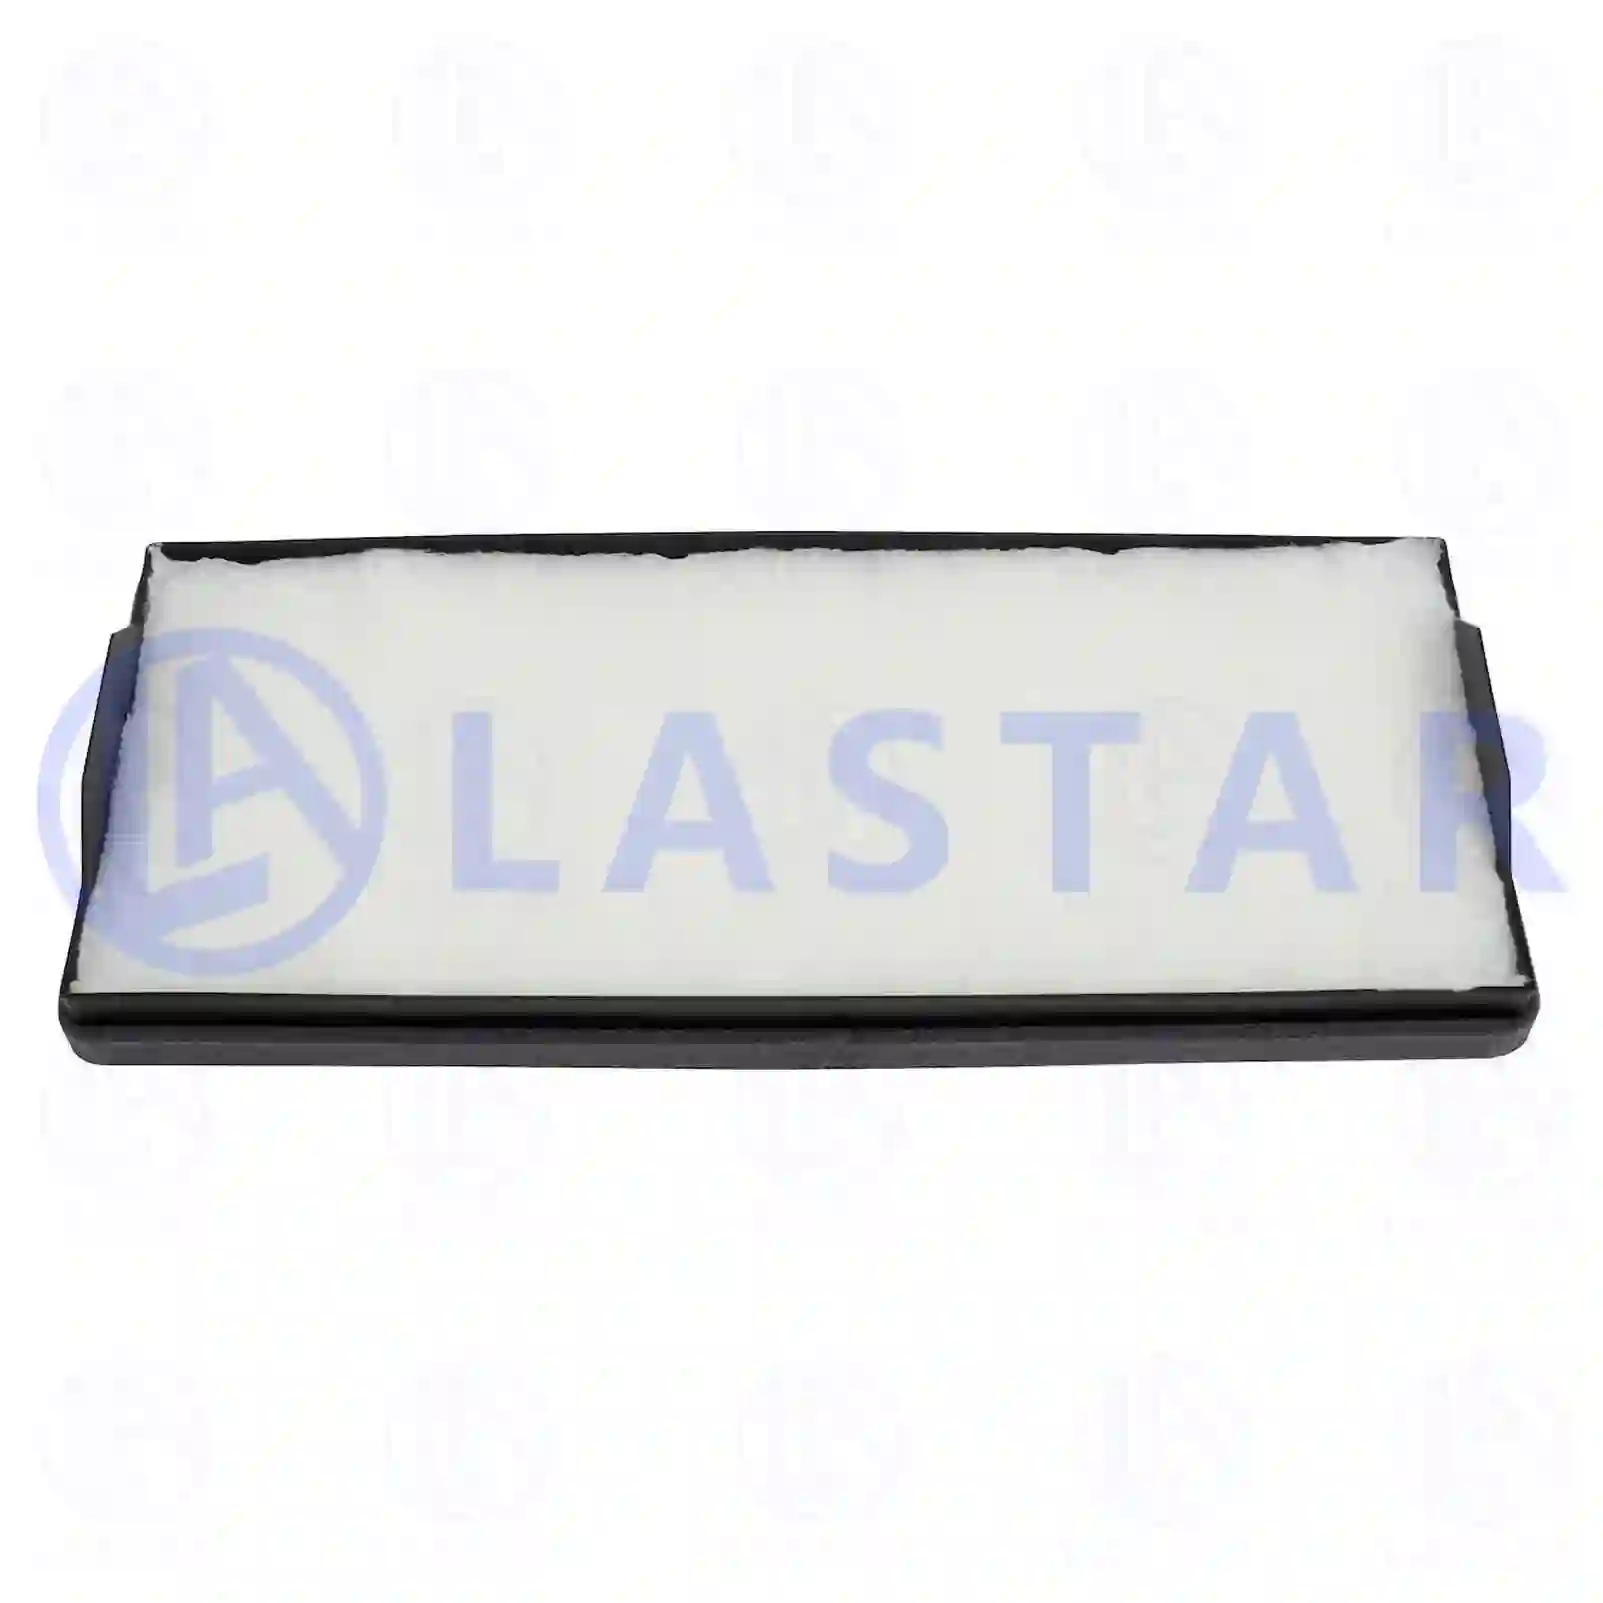 Cabin air filter, 77734889, 9408350247, 7424993603, , ||  77734889 Lastar Spare Part | Truck Spare Parts, Auotomotive Spare Parts Cabin air filter, 77734889, 9408350247, 7424993603, , ||  77734889 Lastar Spare Part | Truck Spare Parts, Auotomotive Spare Parts